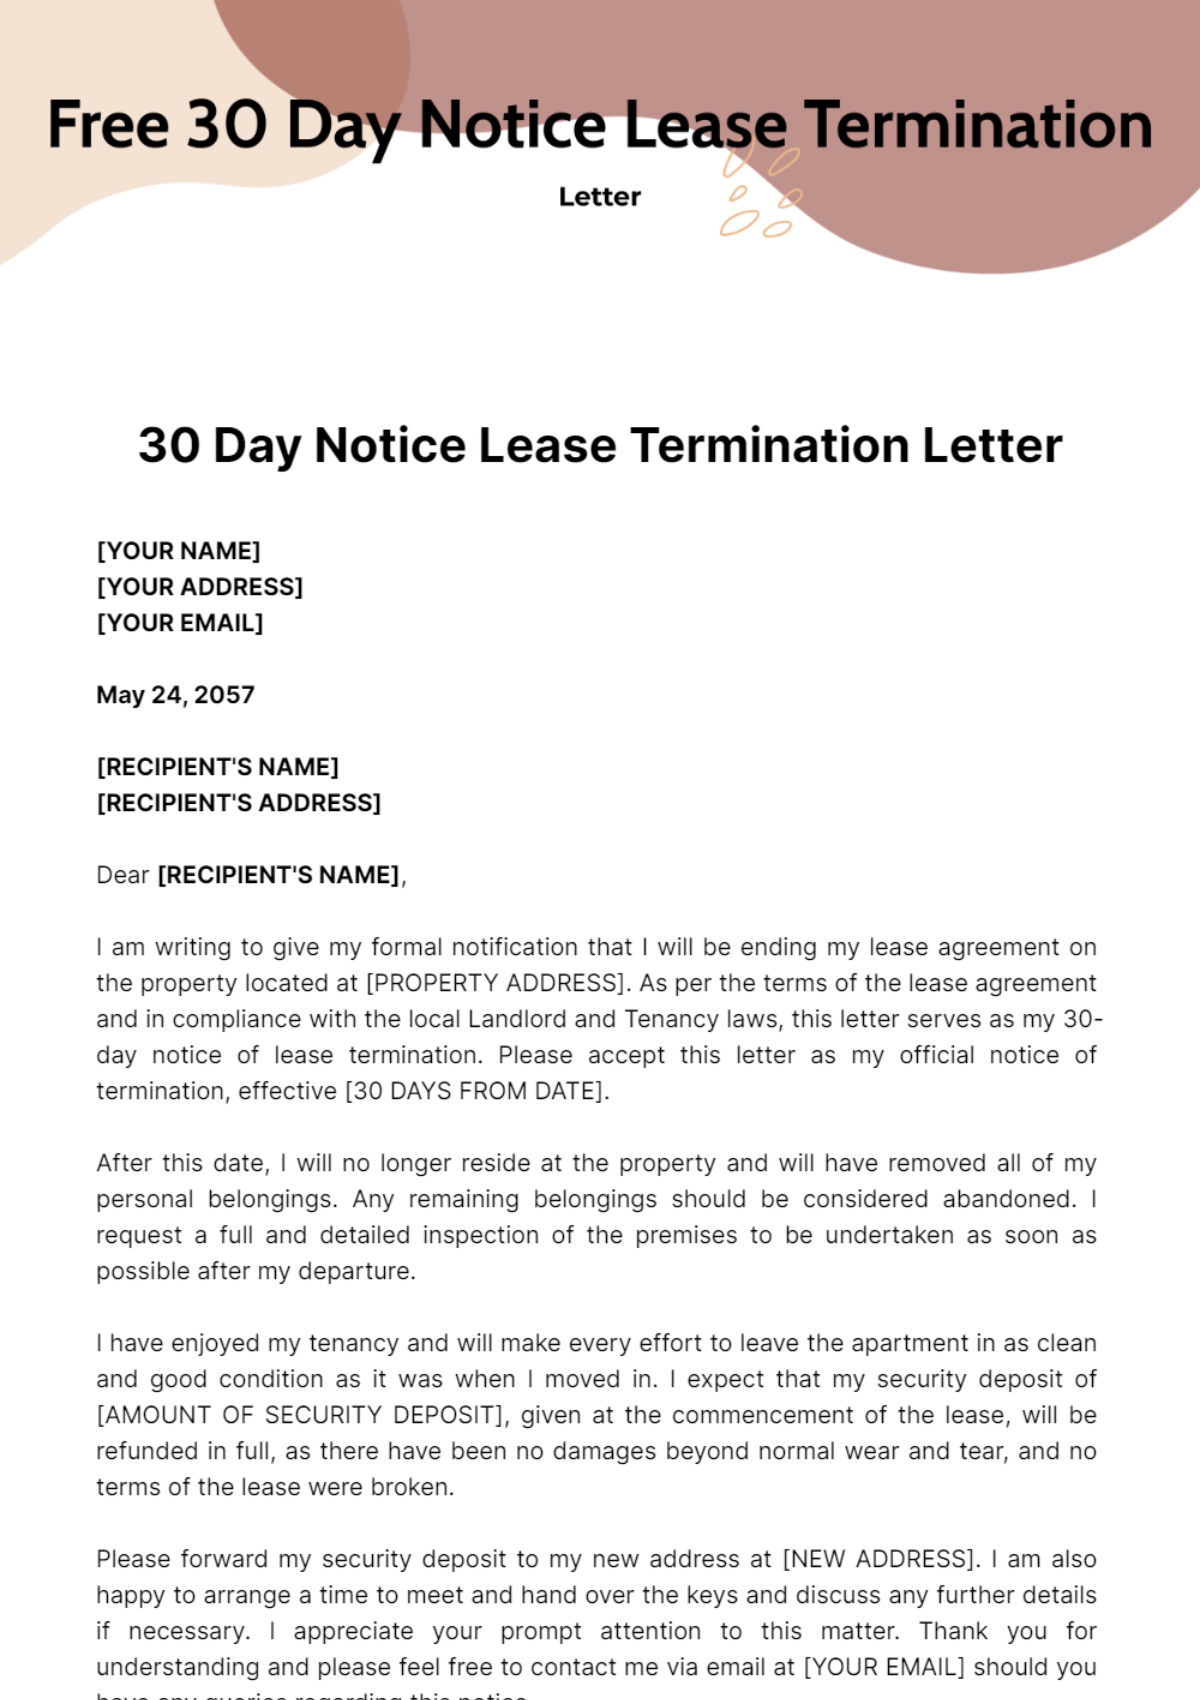 Free 30 Day Notice Lease Termination Letter Template